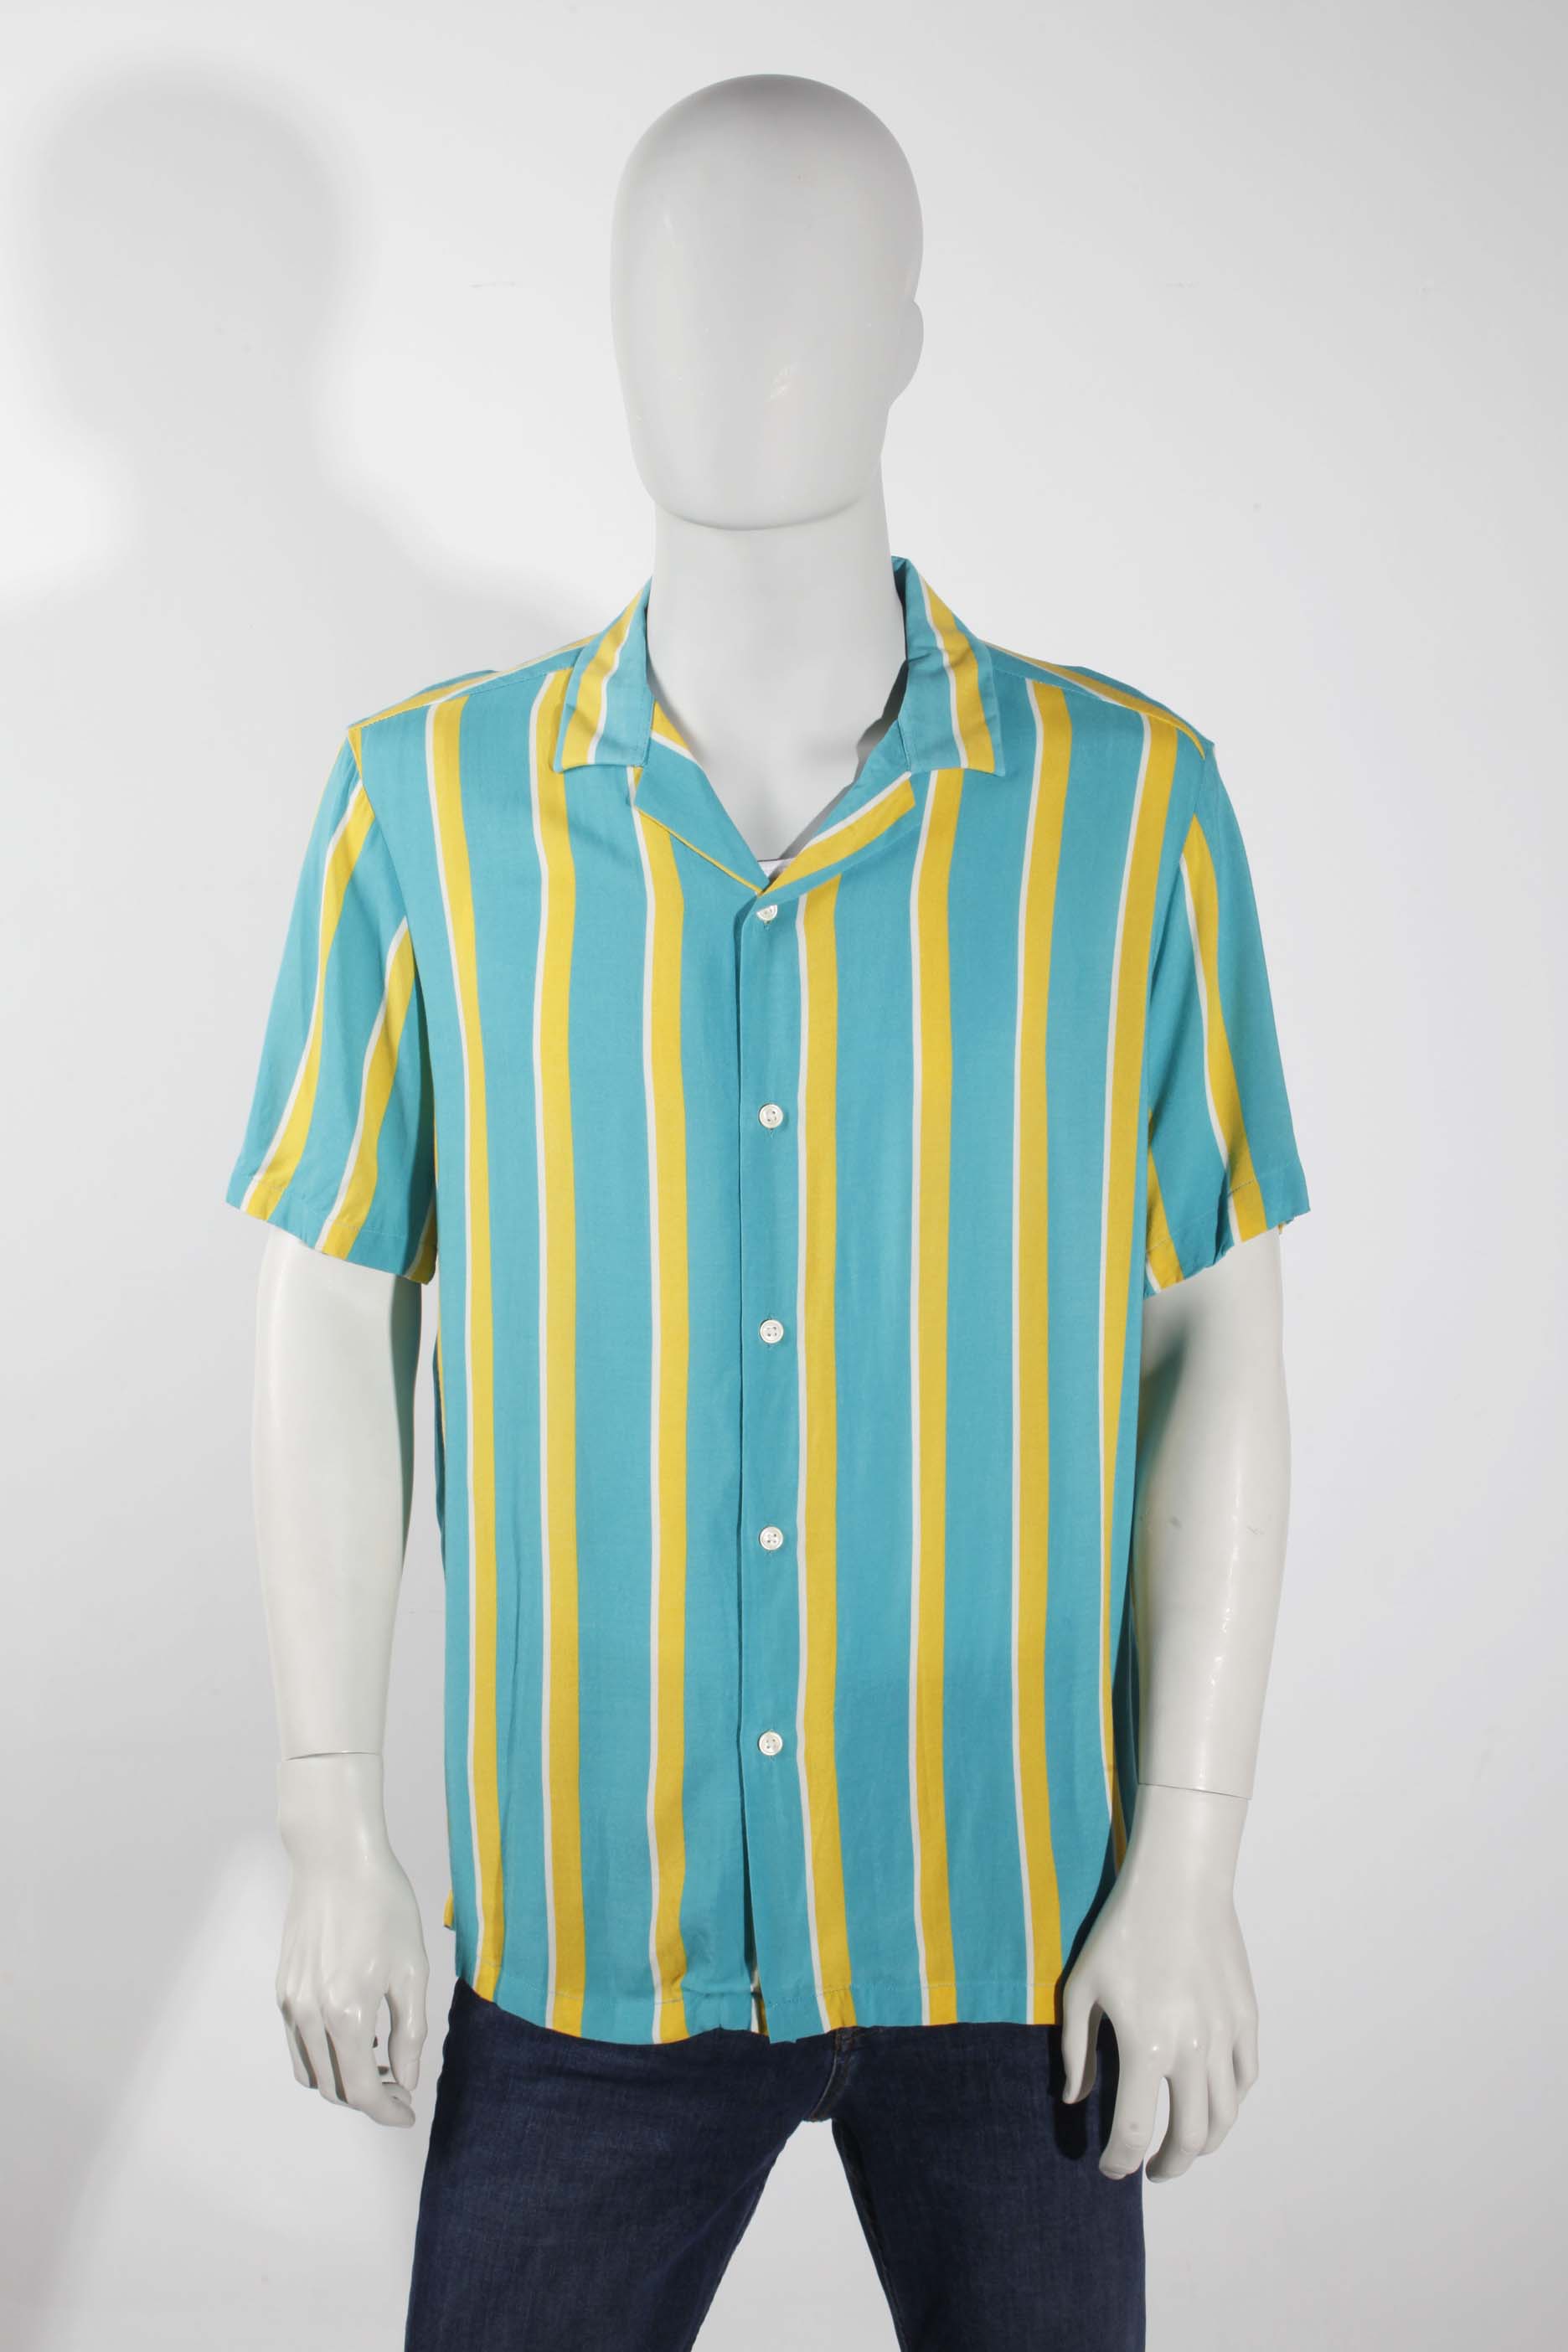 Mens Yellow and Green Striped Short-Sleeved Shirt (Large)